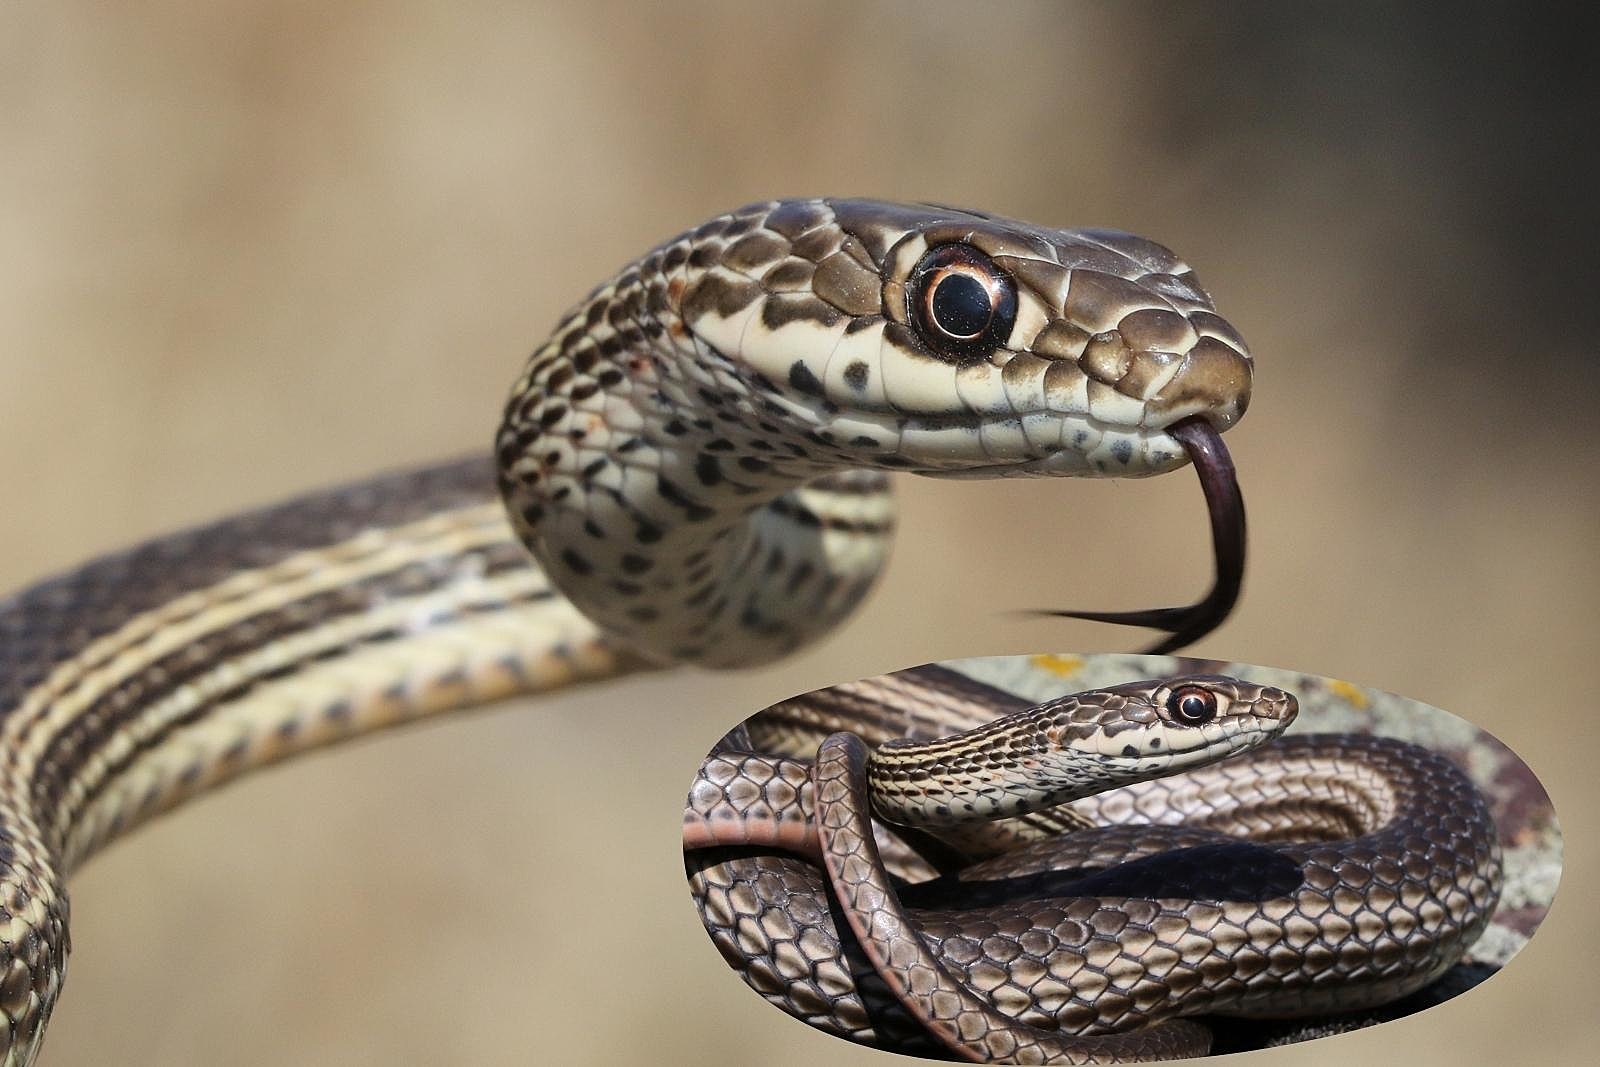 A striped whipsnake close-up in a defensive pose, with an inset of one coiled.